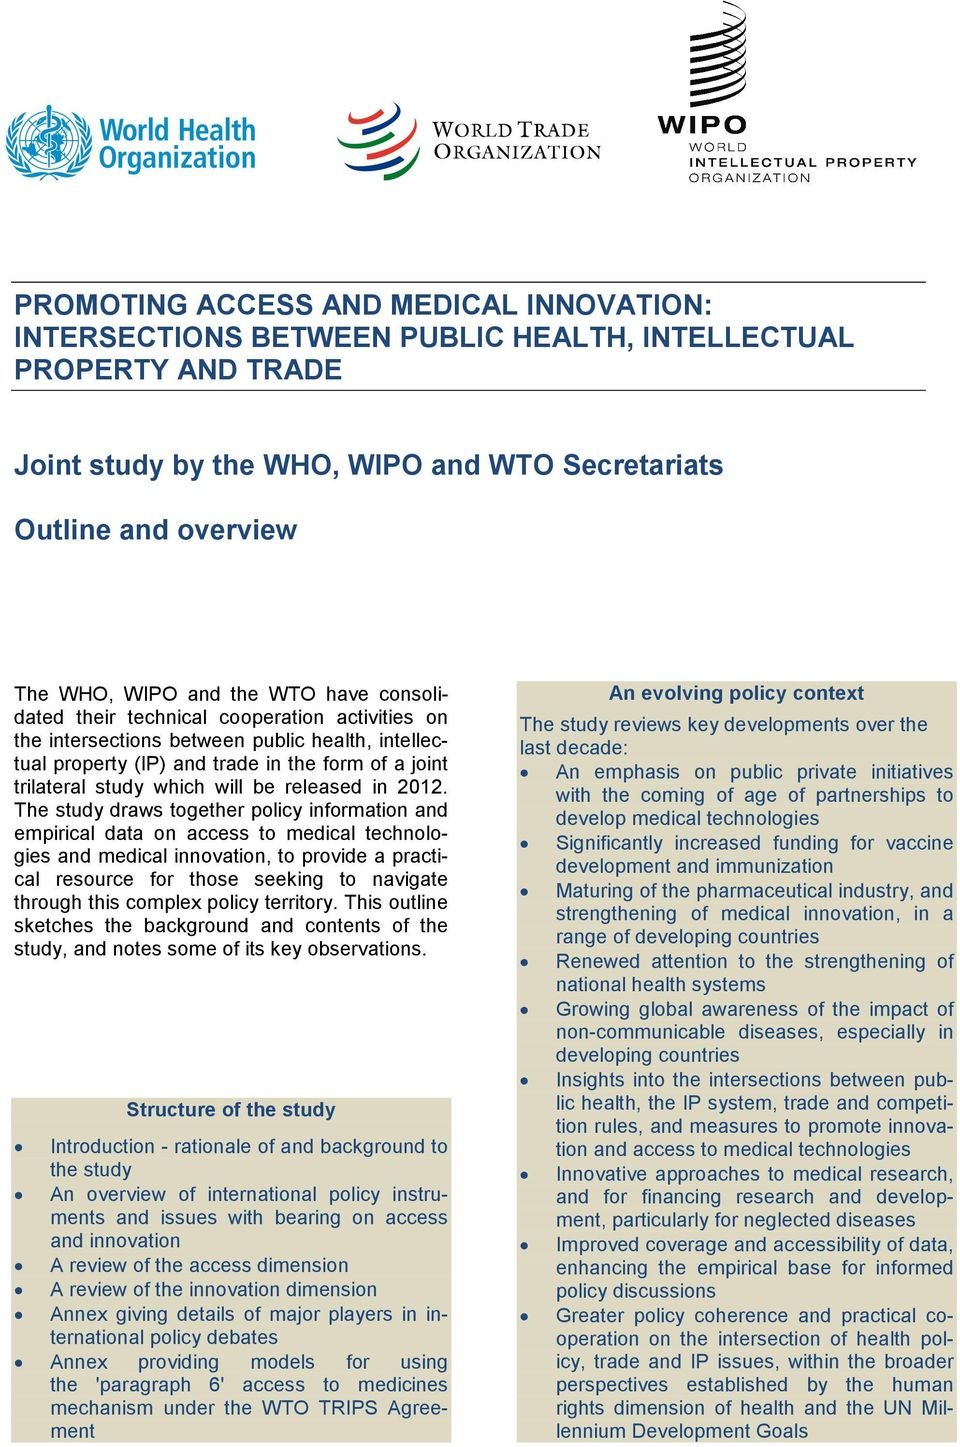 A Handbook On The Wto Trips Agreement Promoting Access And Medical Innovation Intersections Between